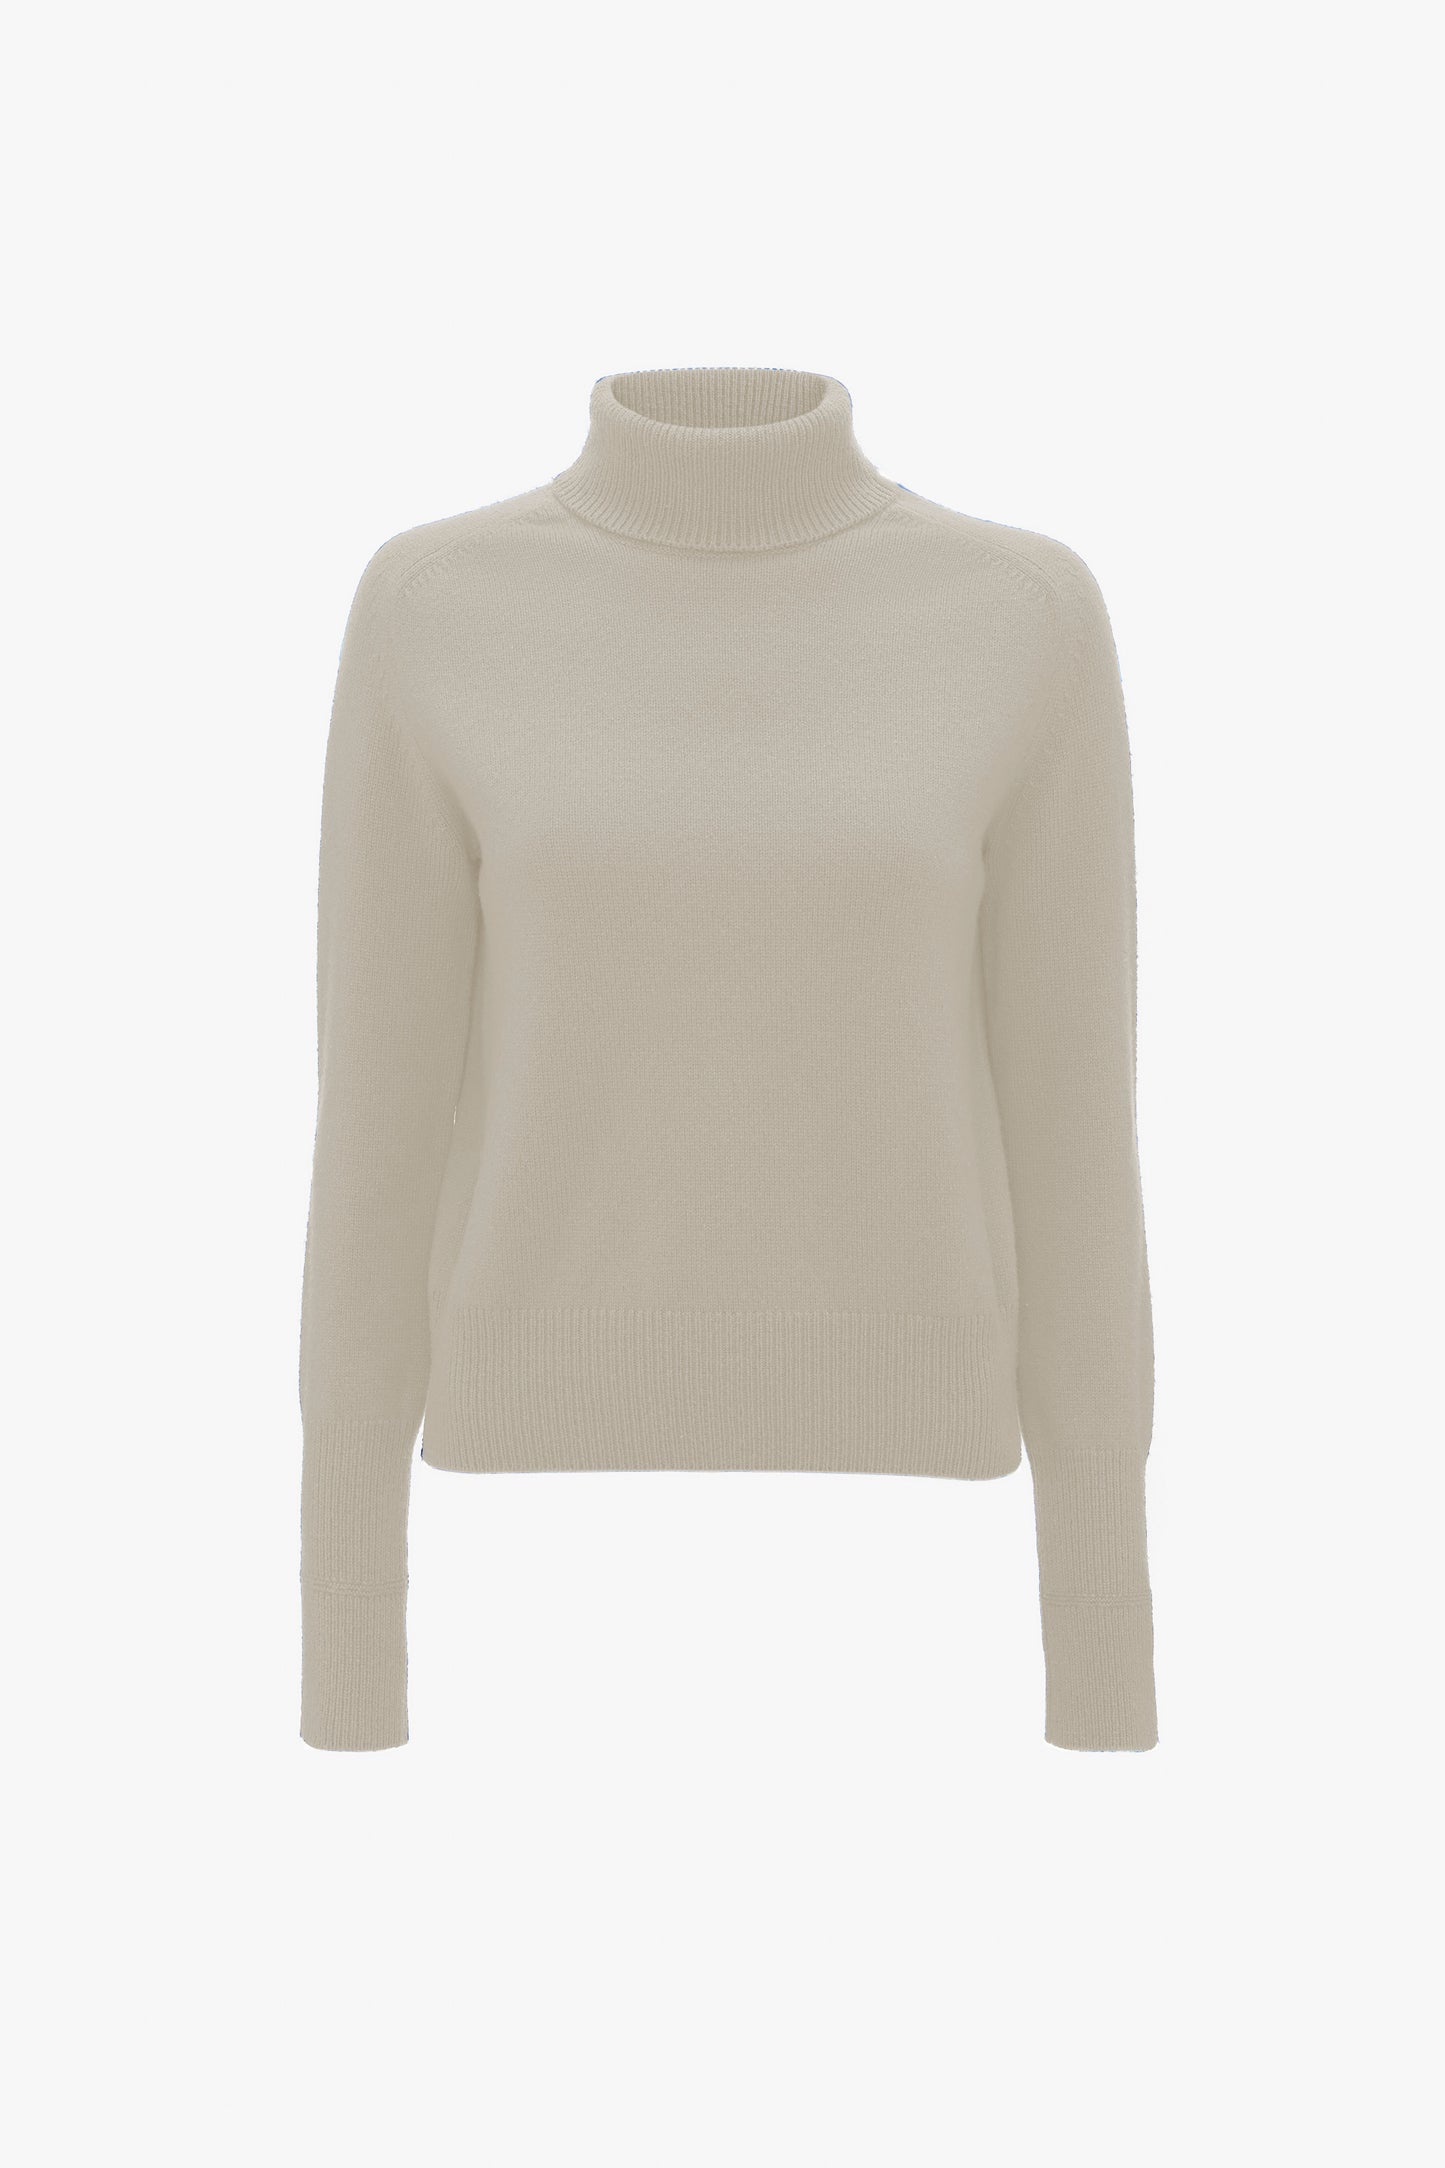 A Victoria Beckham polo neck jumper in ivory displayed against a white background.